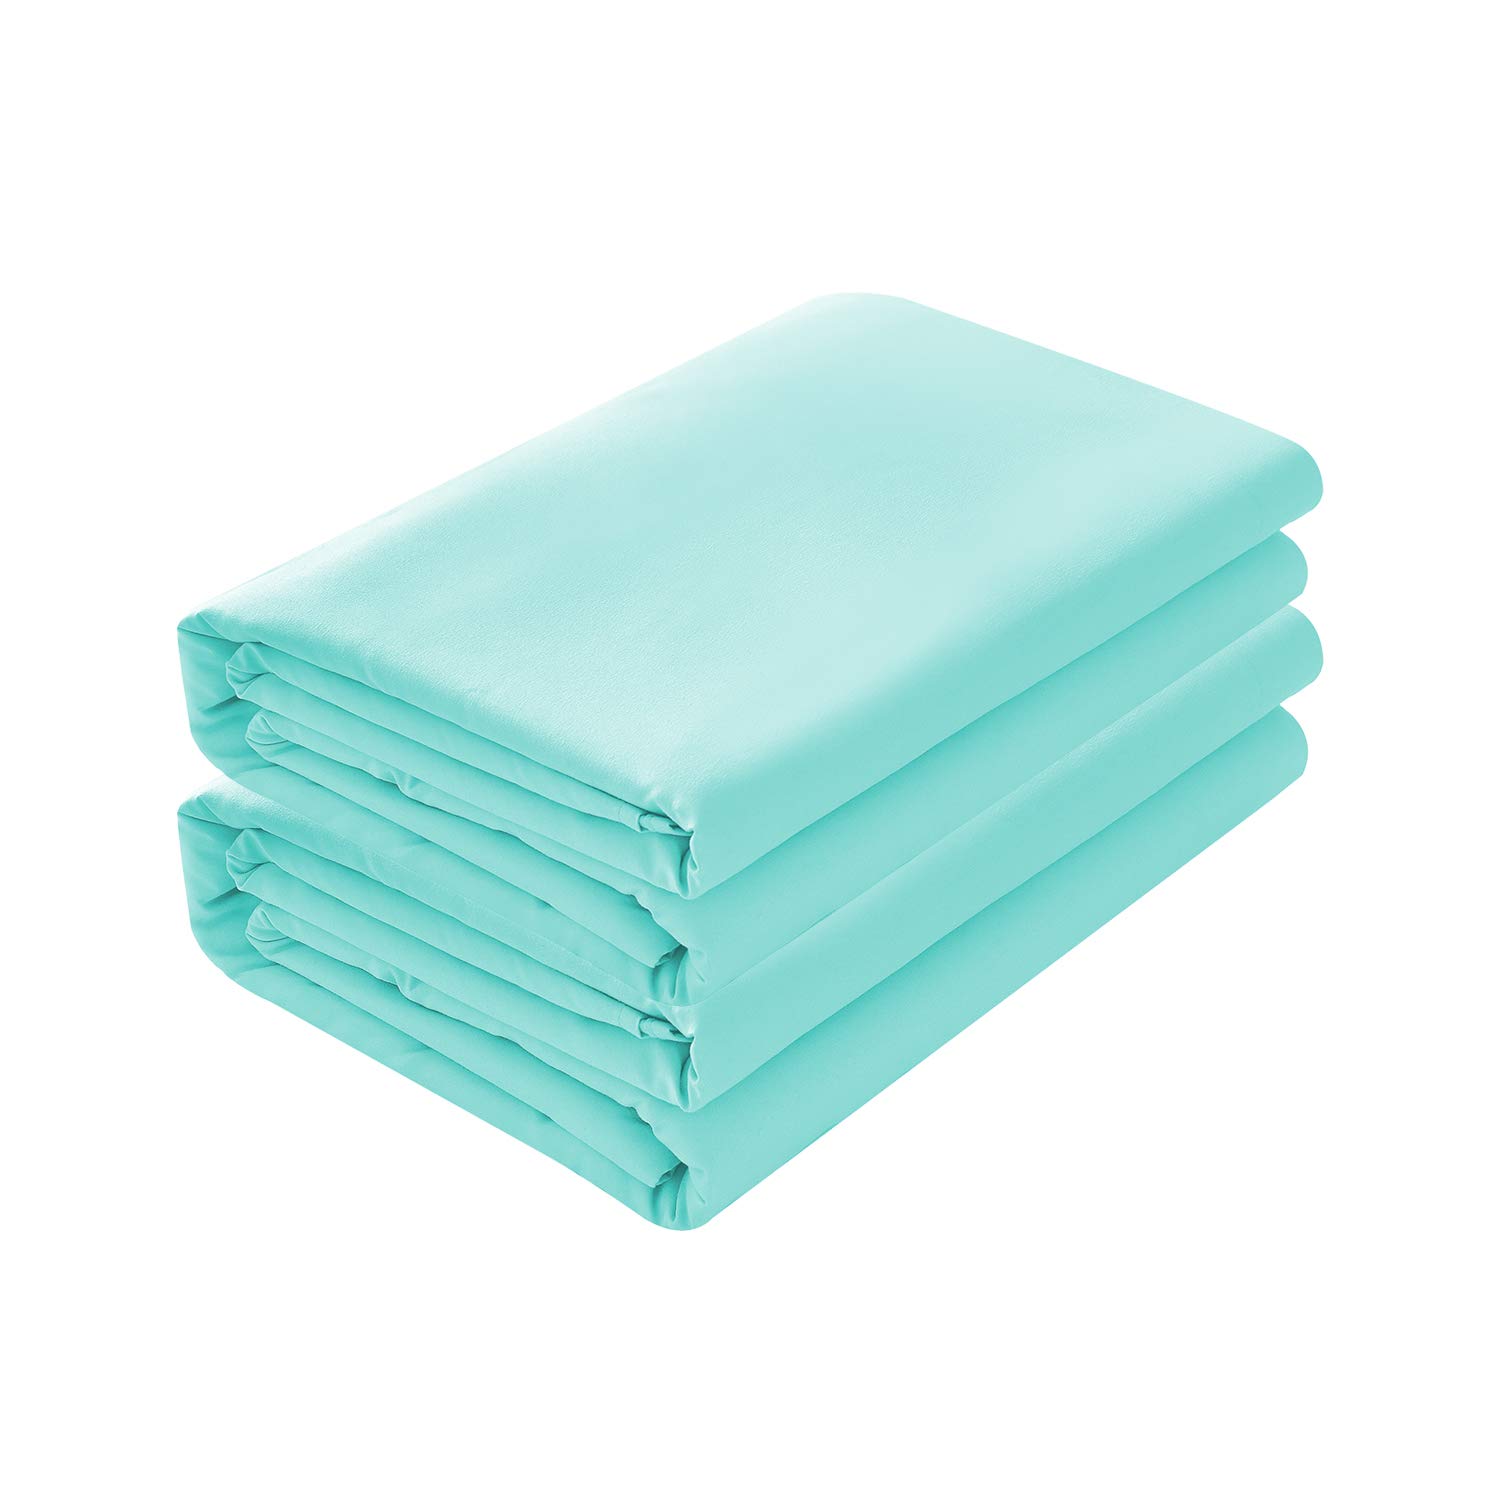 Basic choice 2-Pack Flat Sheets, Breathable Series Bed Top Sheet, Wrinkle, Fade Resistant, Standard 100 by Oeko-Tex - Full, Aqua